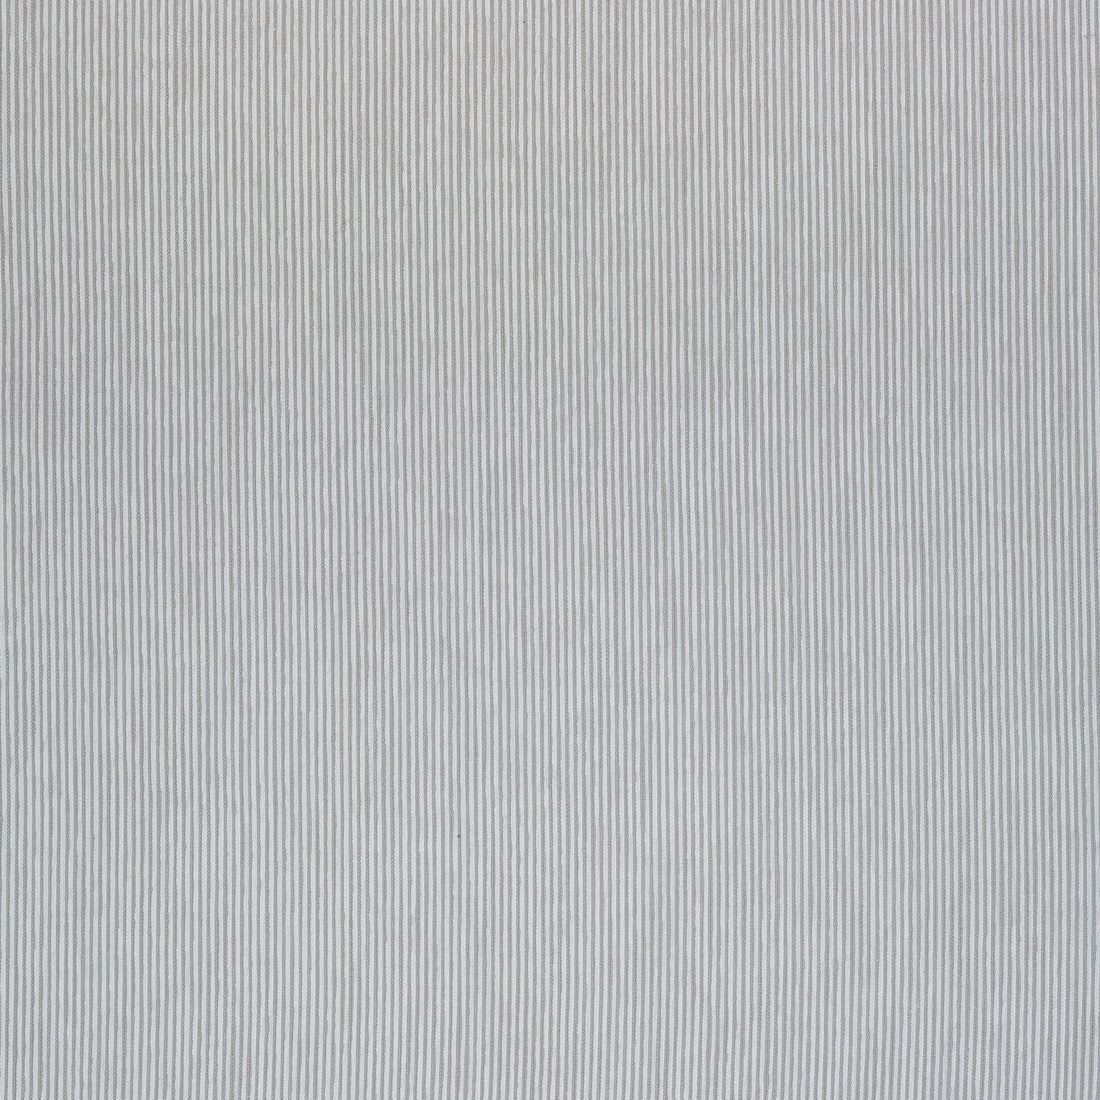 Portsmouth fabric in nickel color - pattern number W73434 - by Thibaut in the Landmark Textures collection